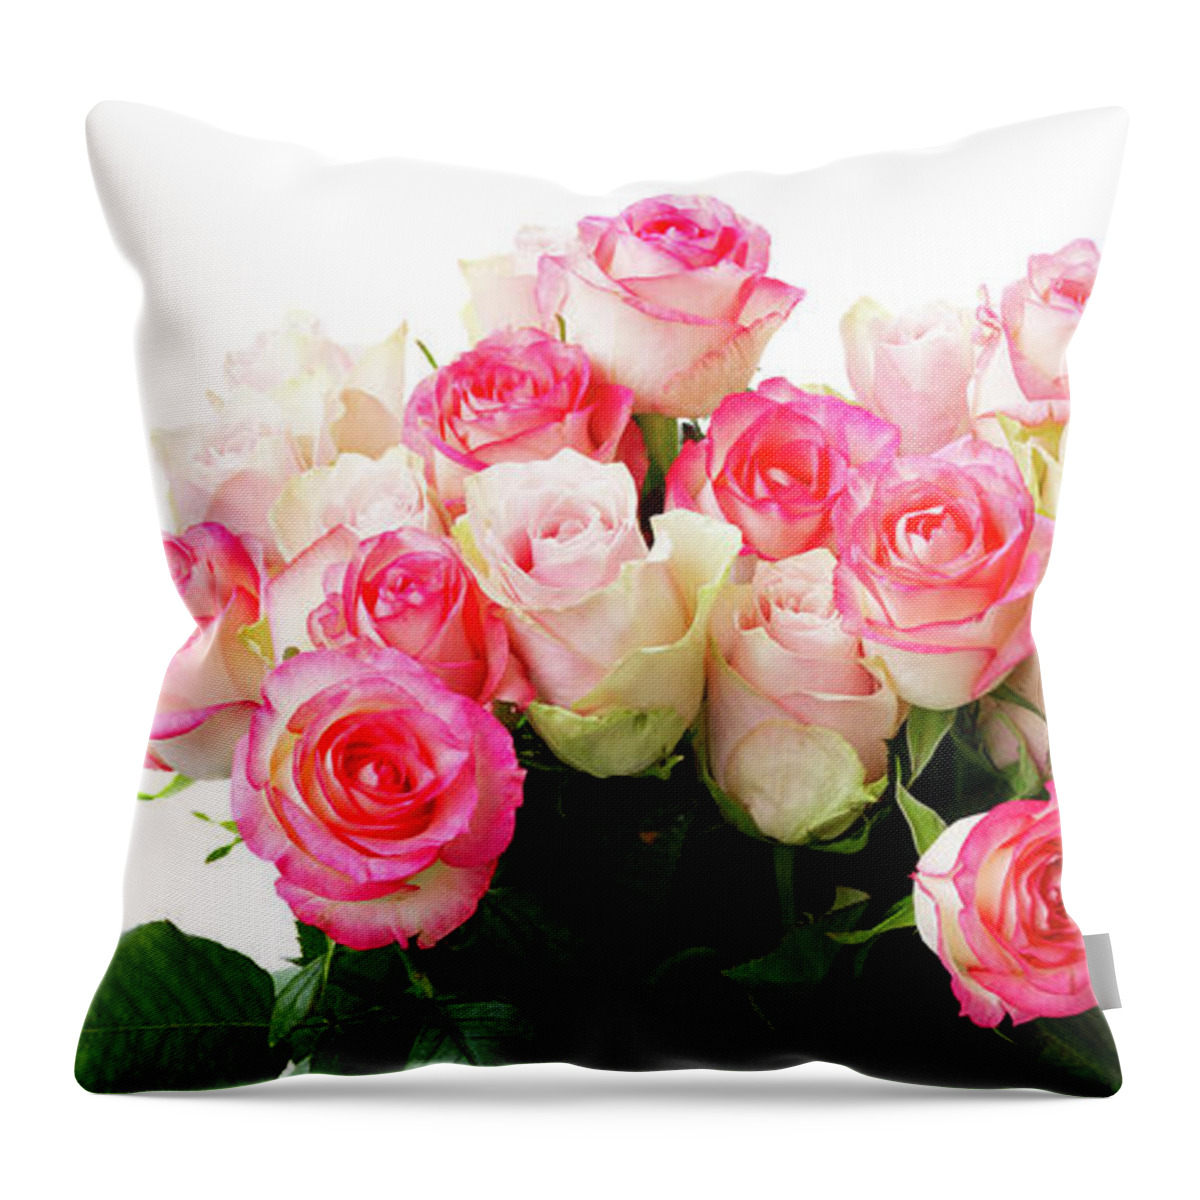 Roses Throw Pillow featuring the photograph Fresh Rose Flowers by Anastasy Yarmolovich